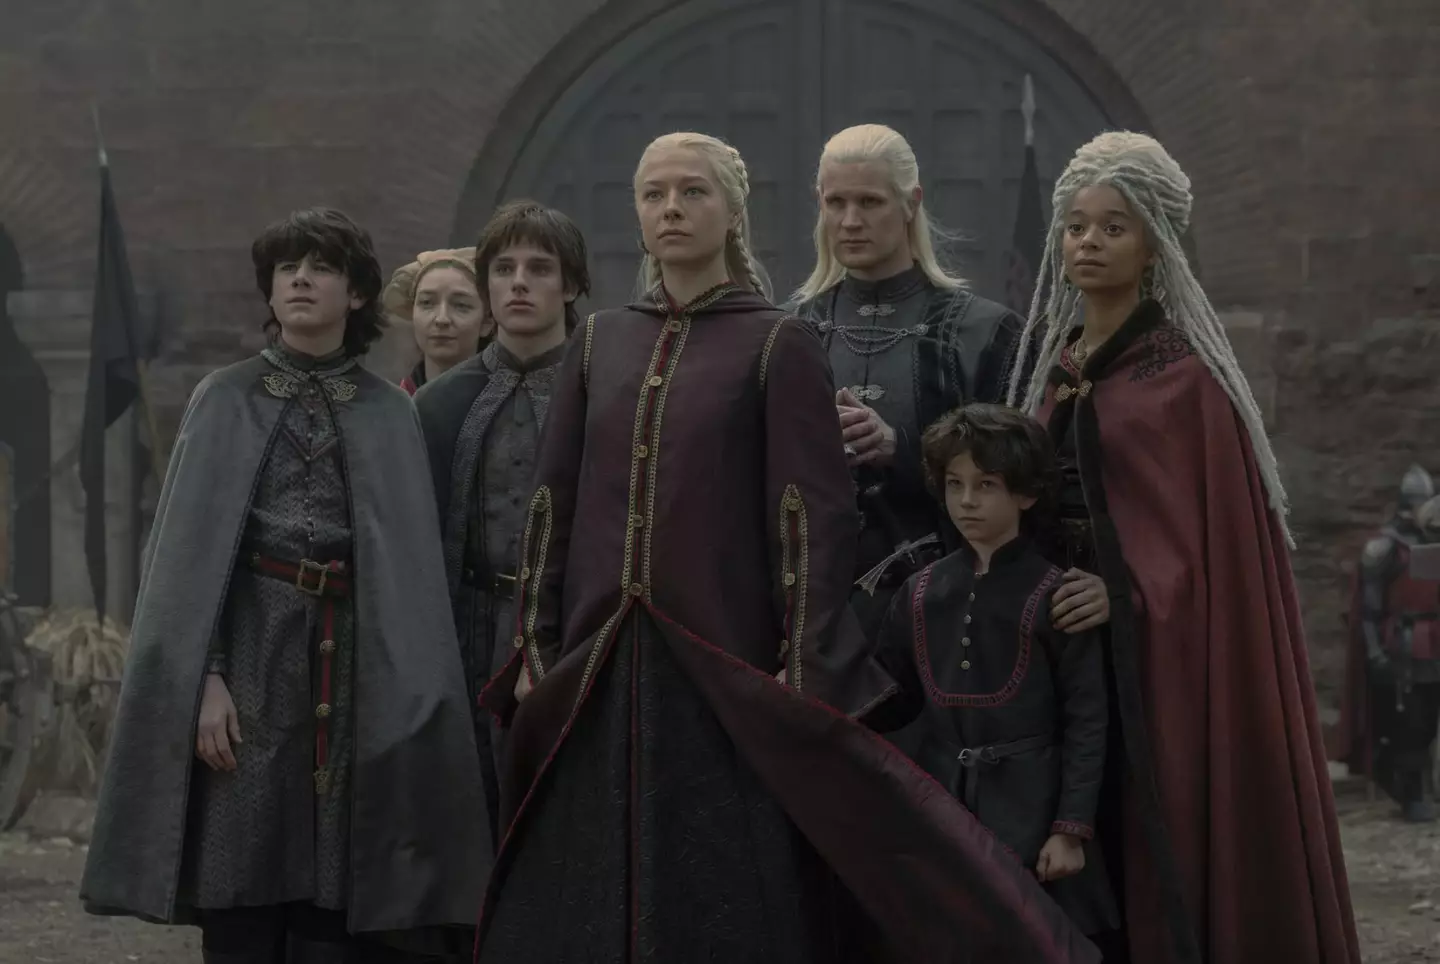 The Targaryen's take centre stage in House of the Dragon.